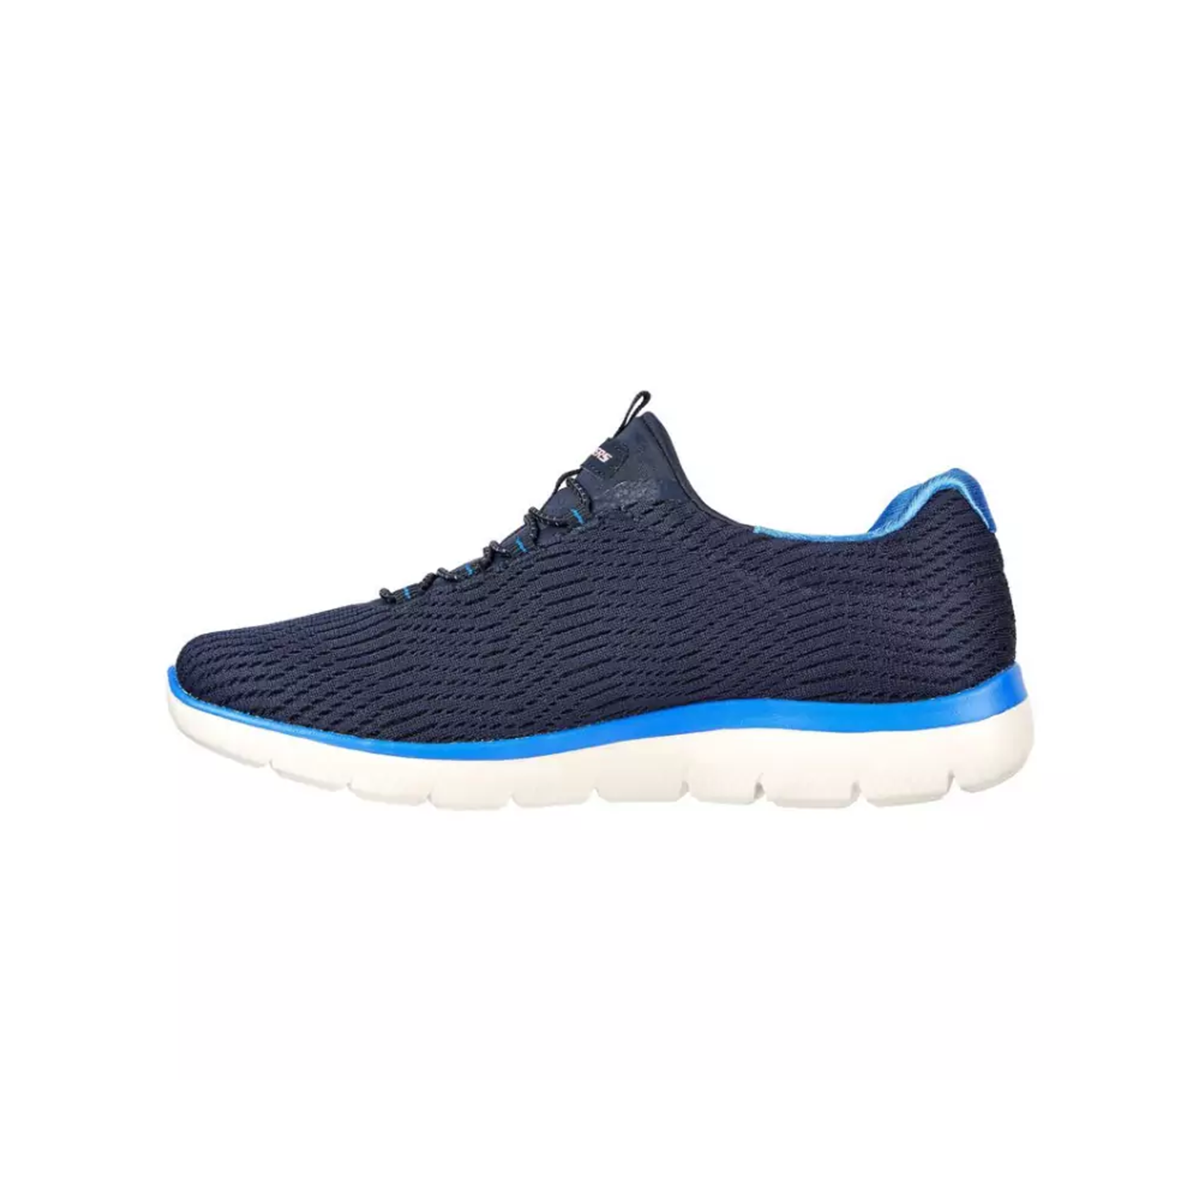 Skechers Summits Next Wave Shoes For Women, Navy Blue